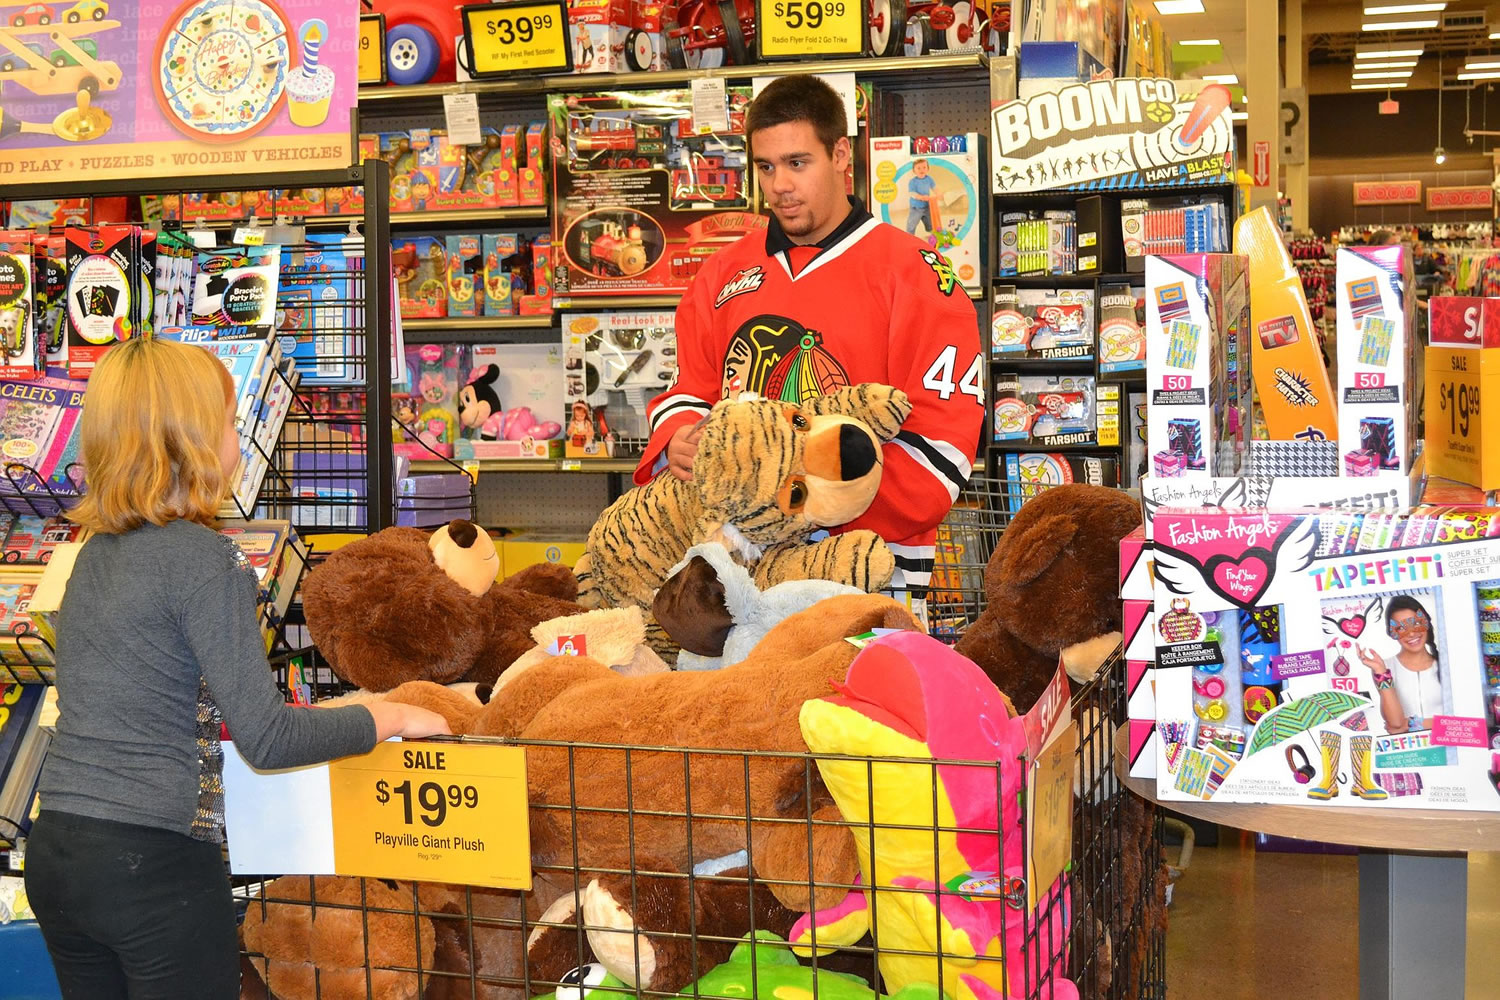 Winterhawks defenseman Keoni Texeira was one of several Winterhawks players who recently shopped for toys and clothes with 25 students from Portland's Lincoln Park Elementary School.